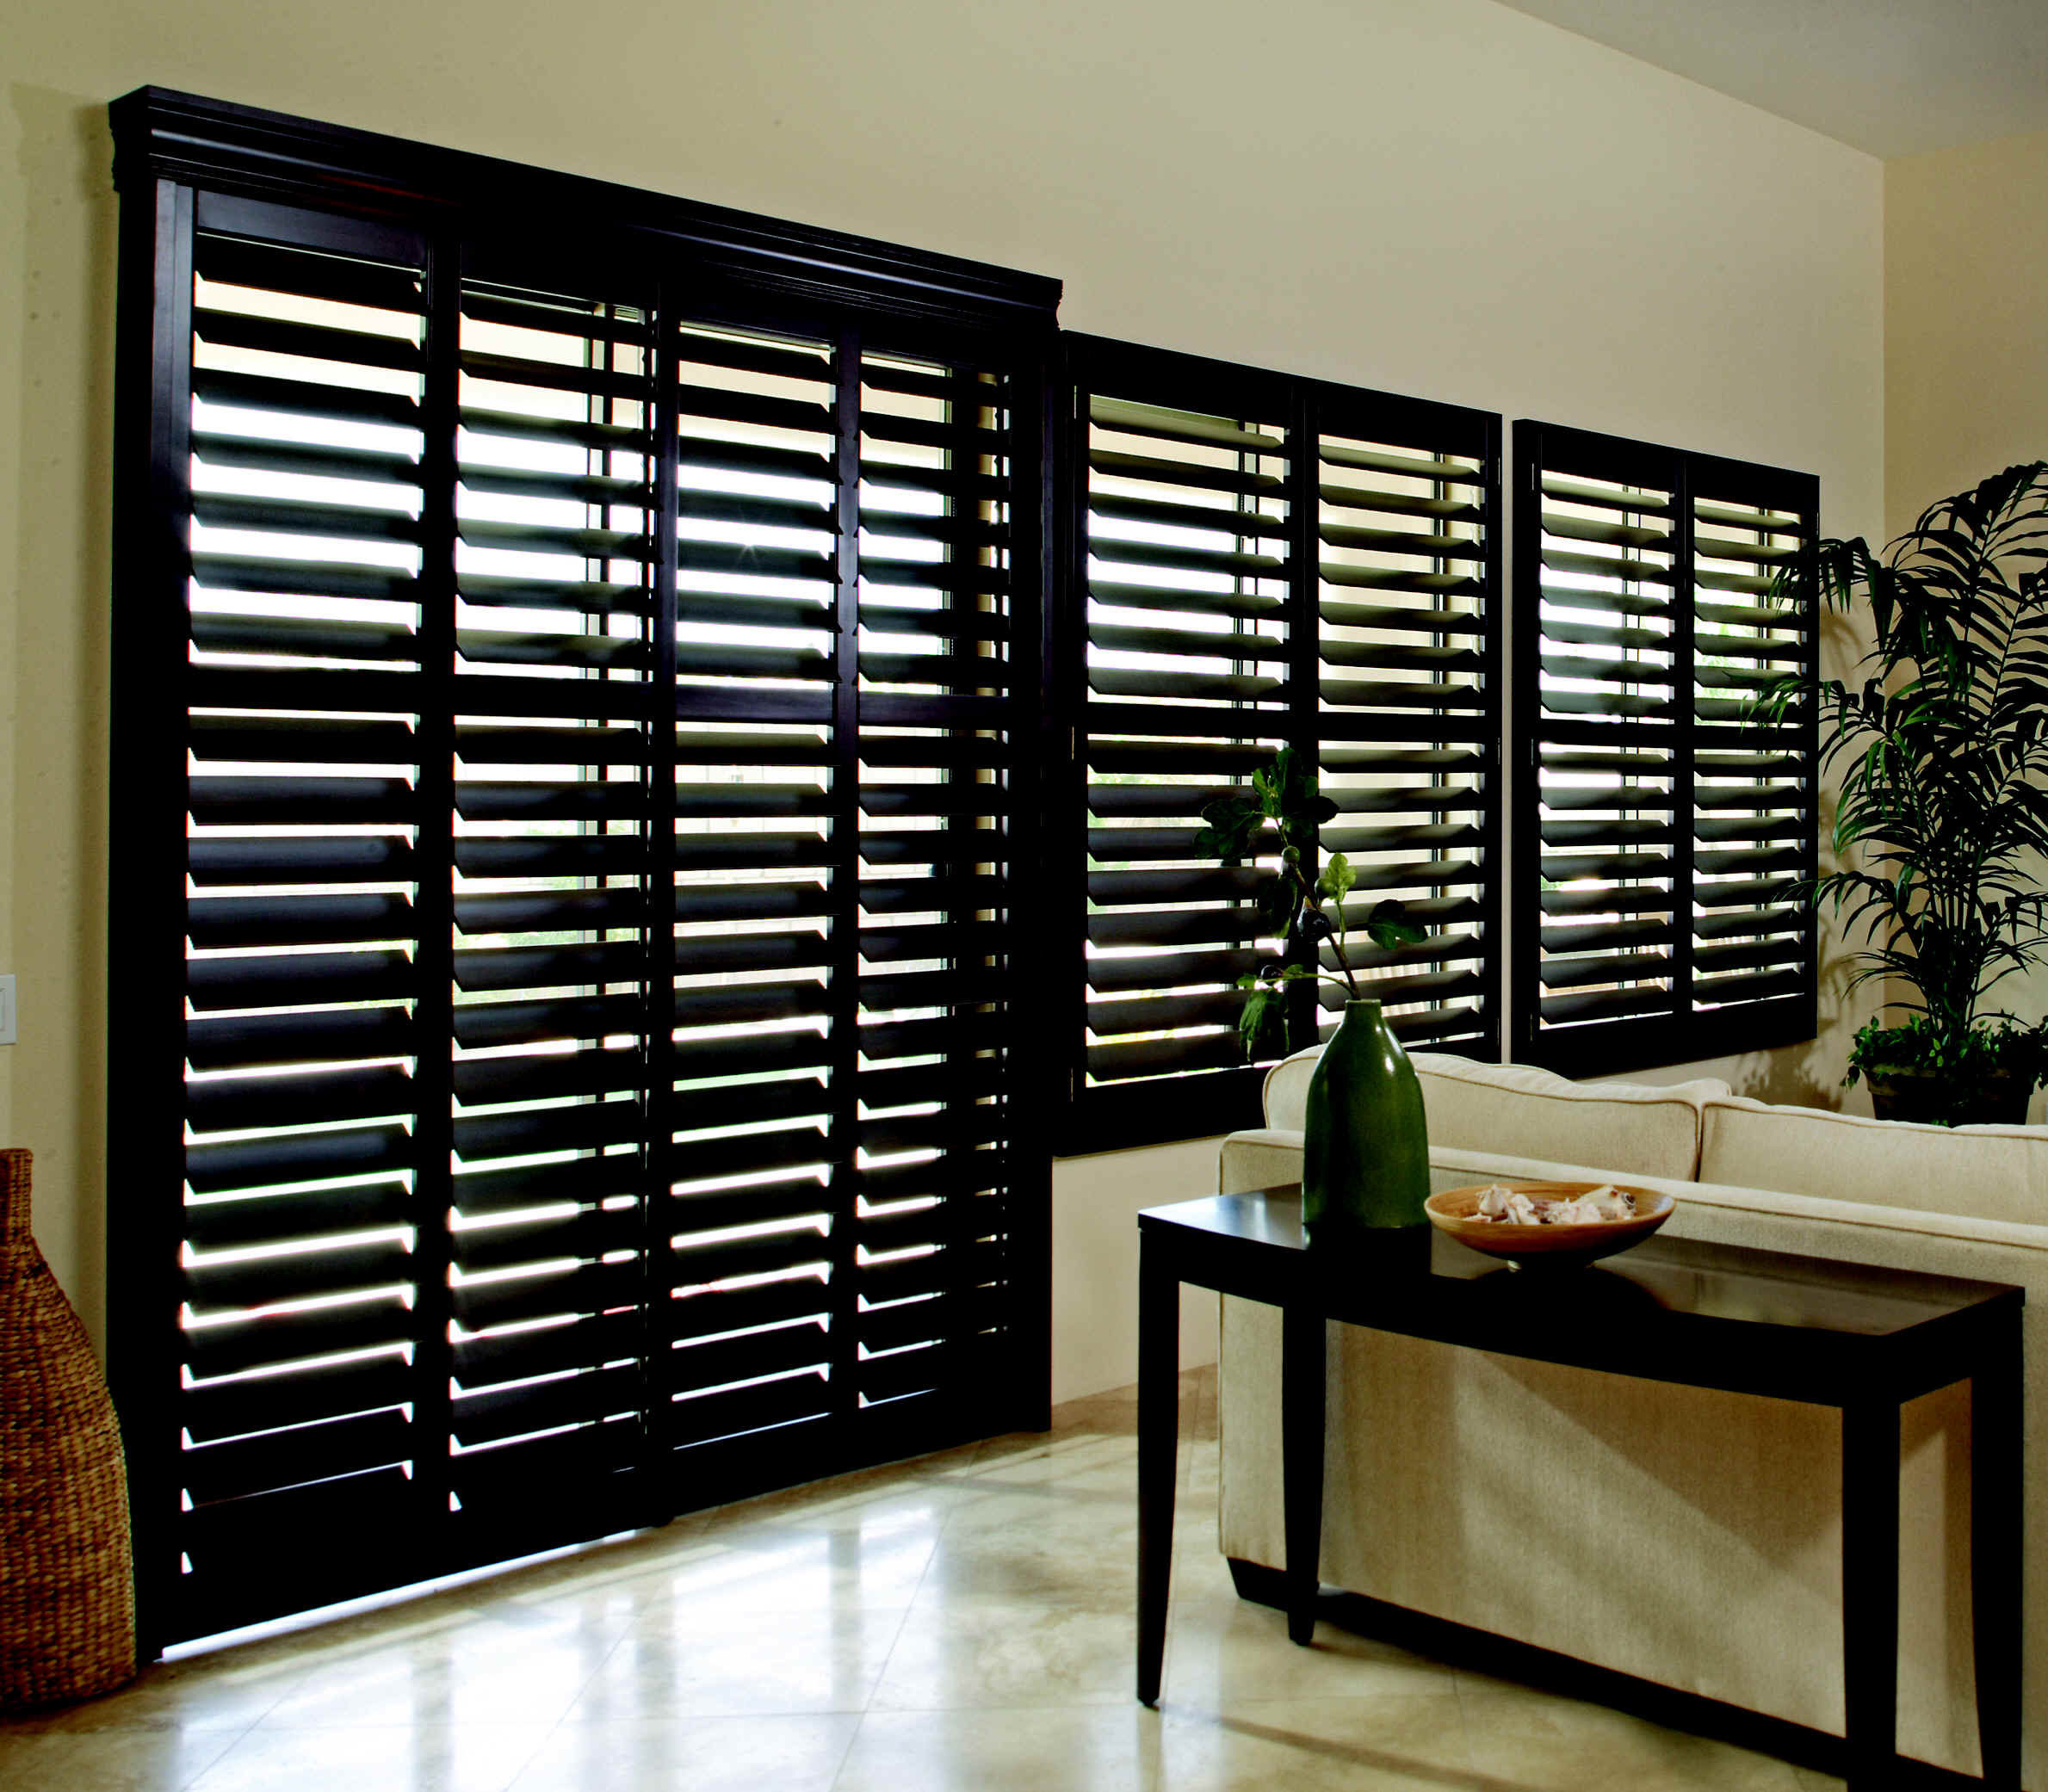 Low Cost High Quality Faux Wood Shutters  in Taos